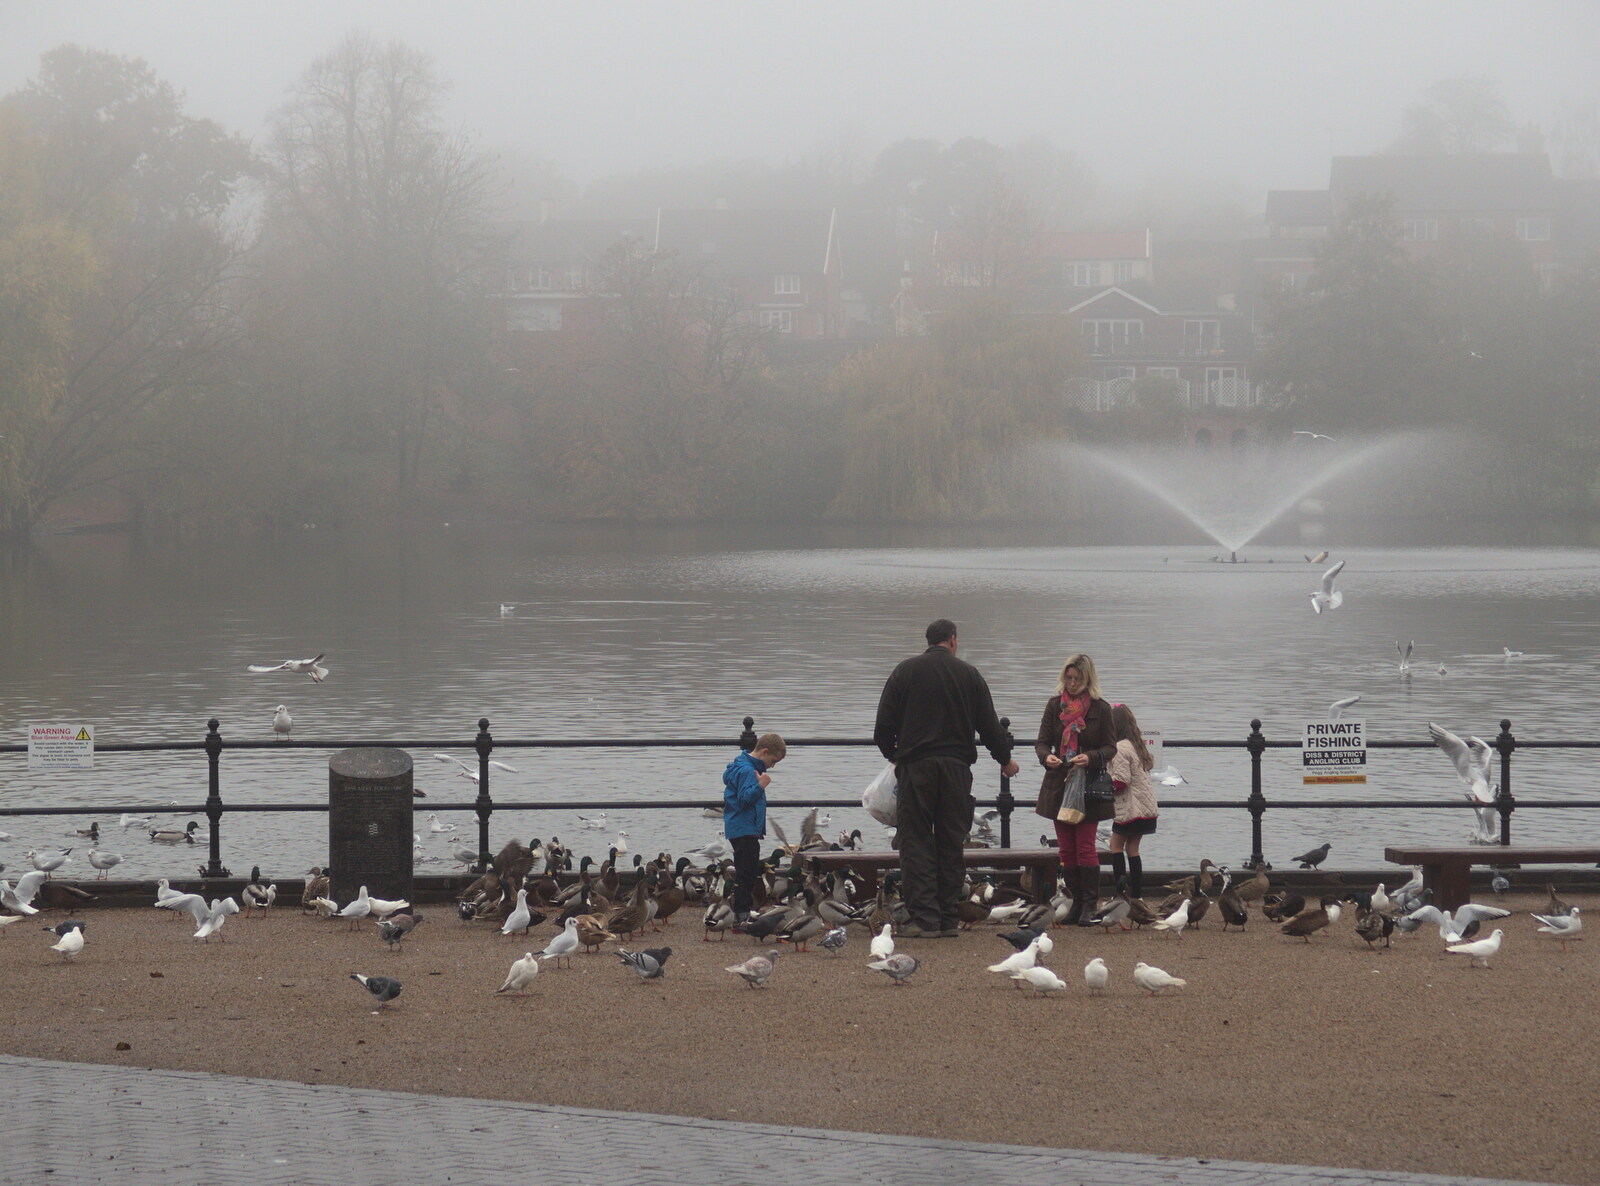 It's a misty day down at The Mere in Diss from November Singing, Gislingham Primary School, Suffolk - 17th November 2014